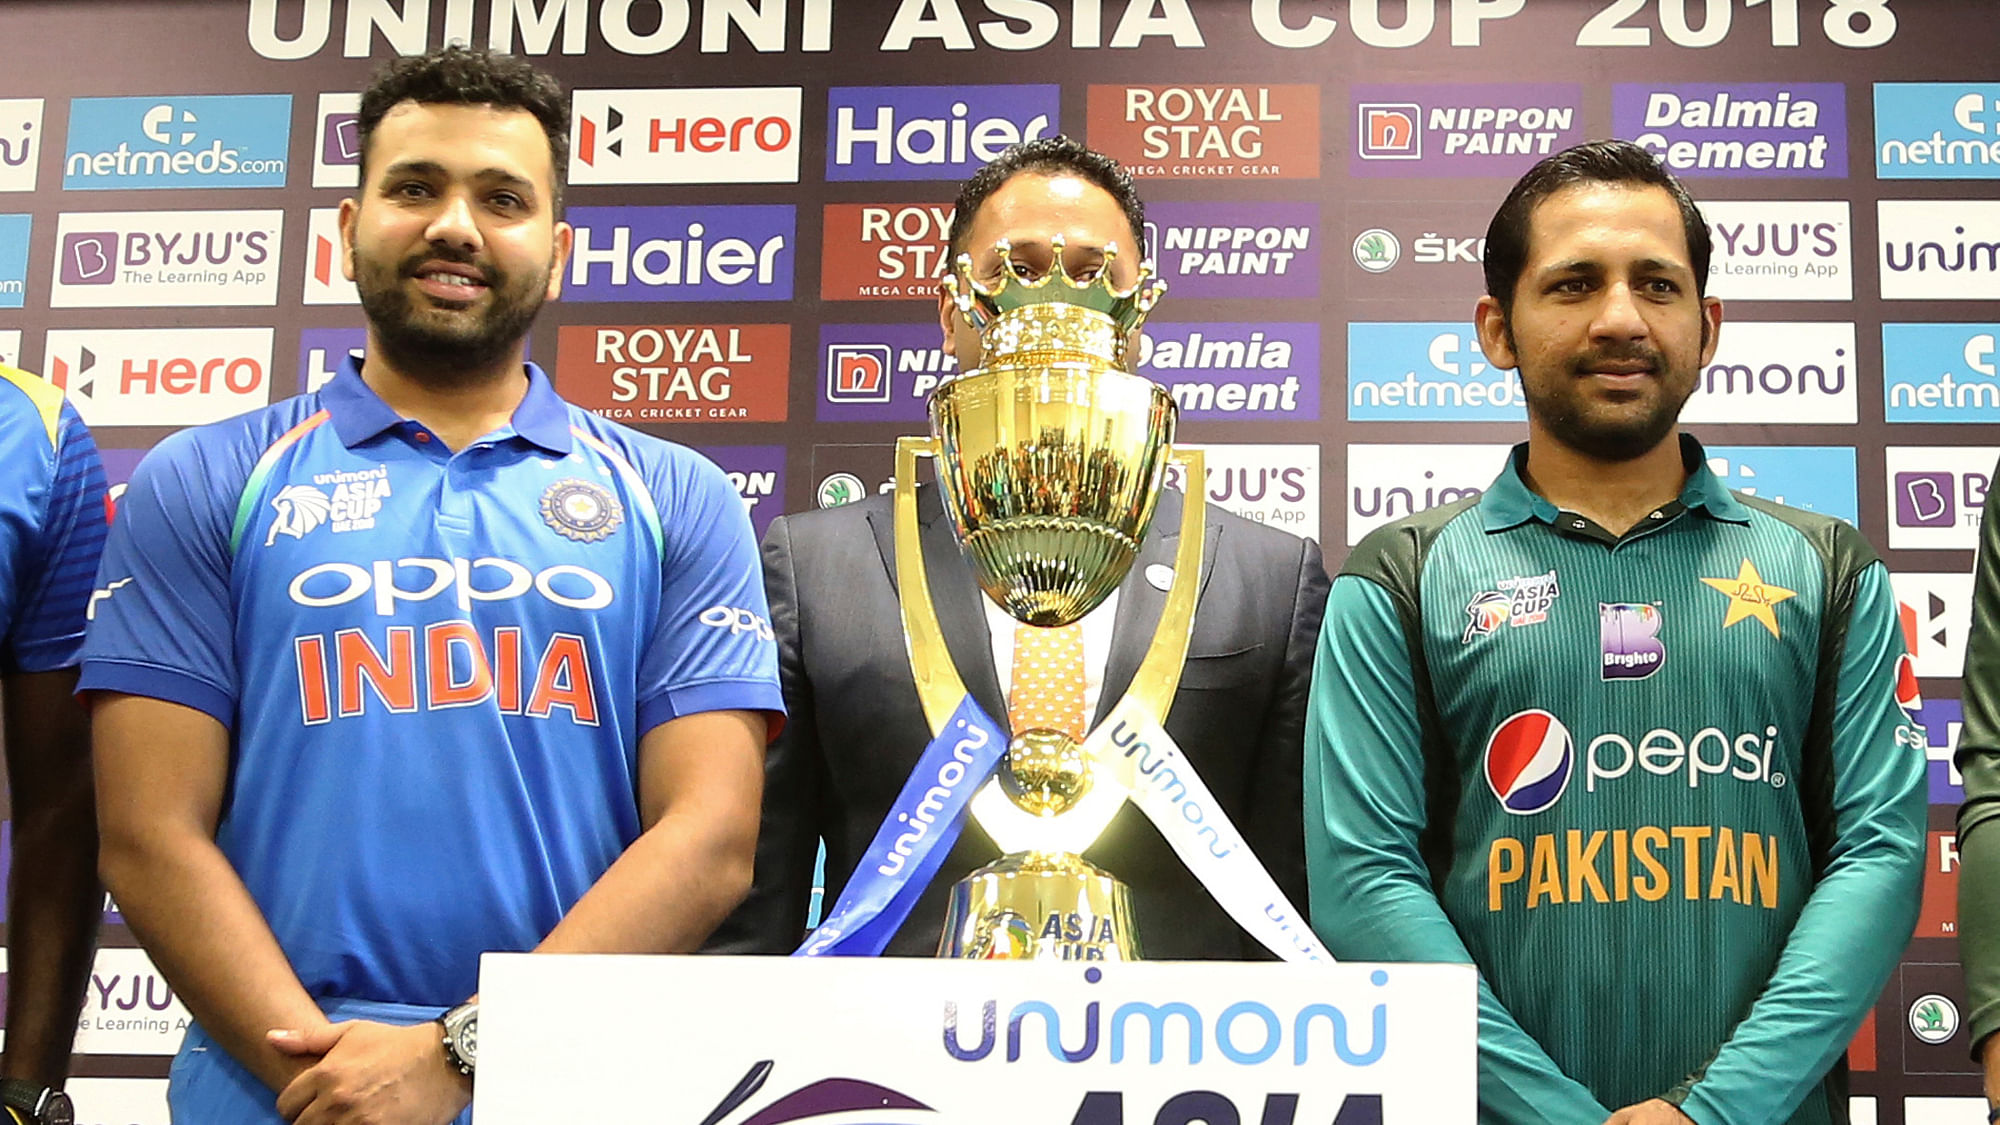 Captains of India Rohit Sharma, left, and Pakistan Sarfraz Ahmed pose with the winners trophy before the start of the Asia Cup. The two teams will face off on Tuesday in Dubai.